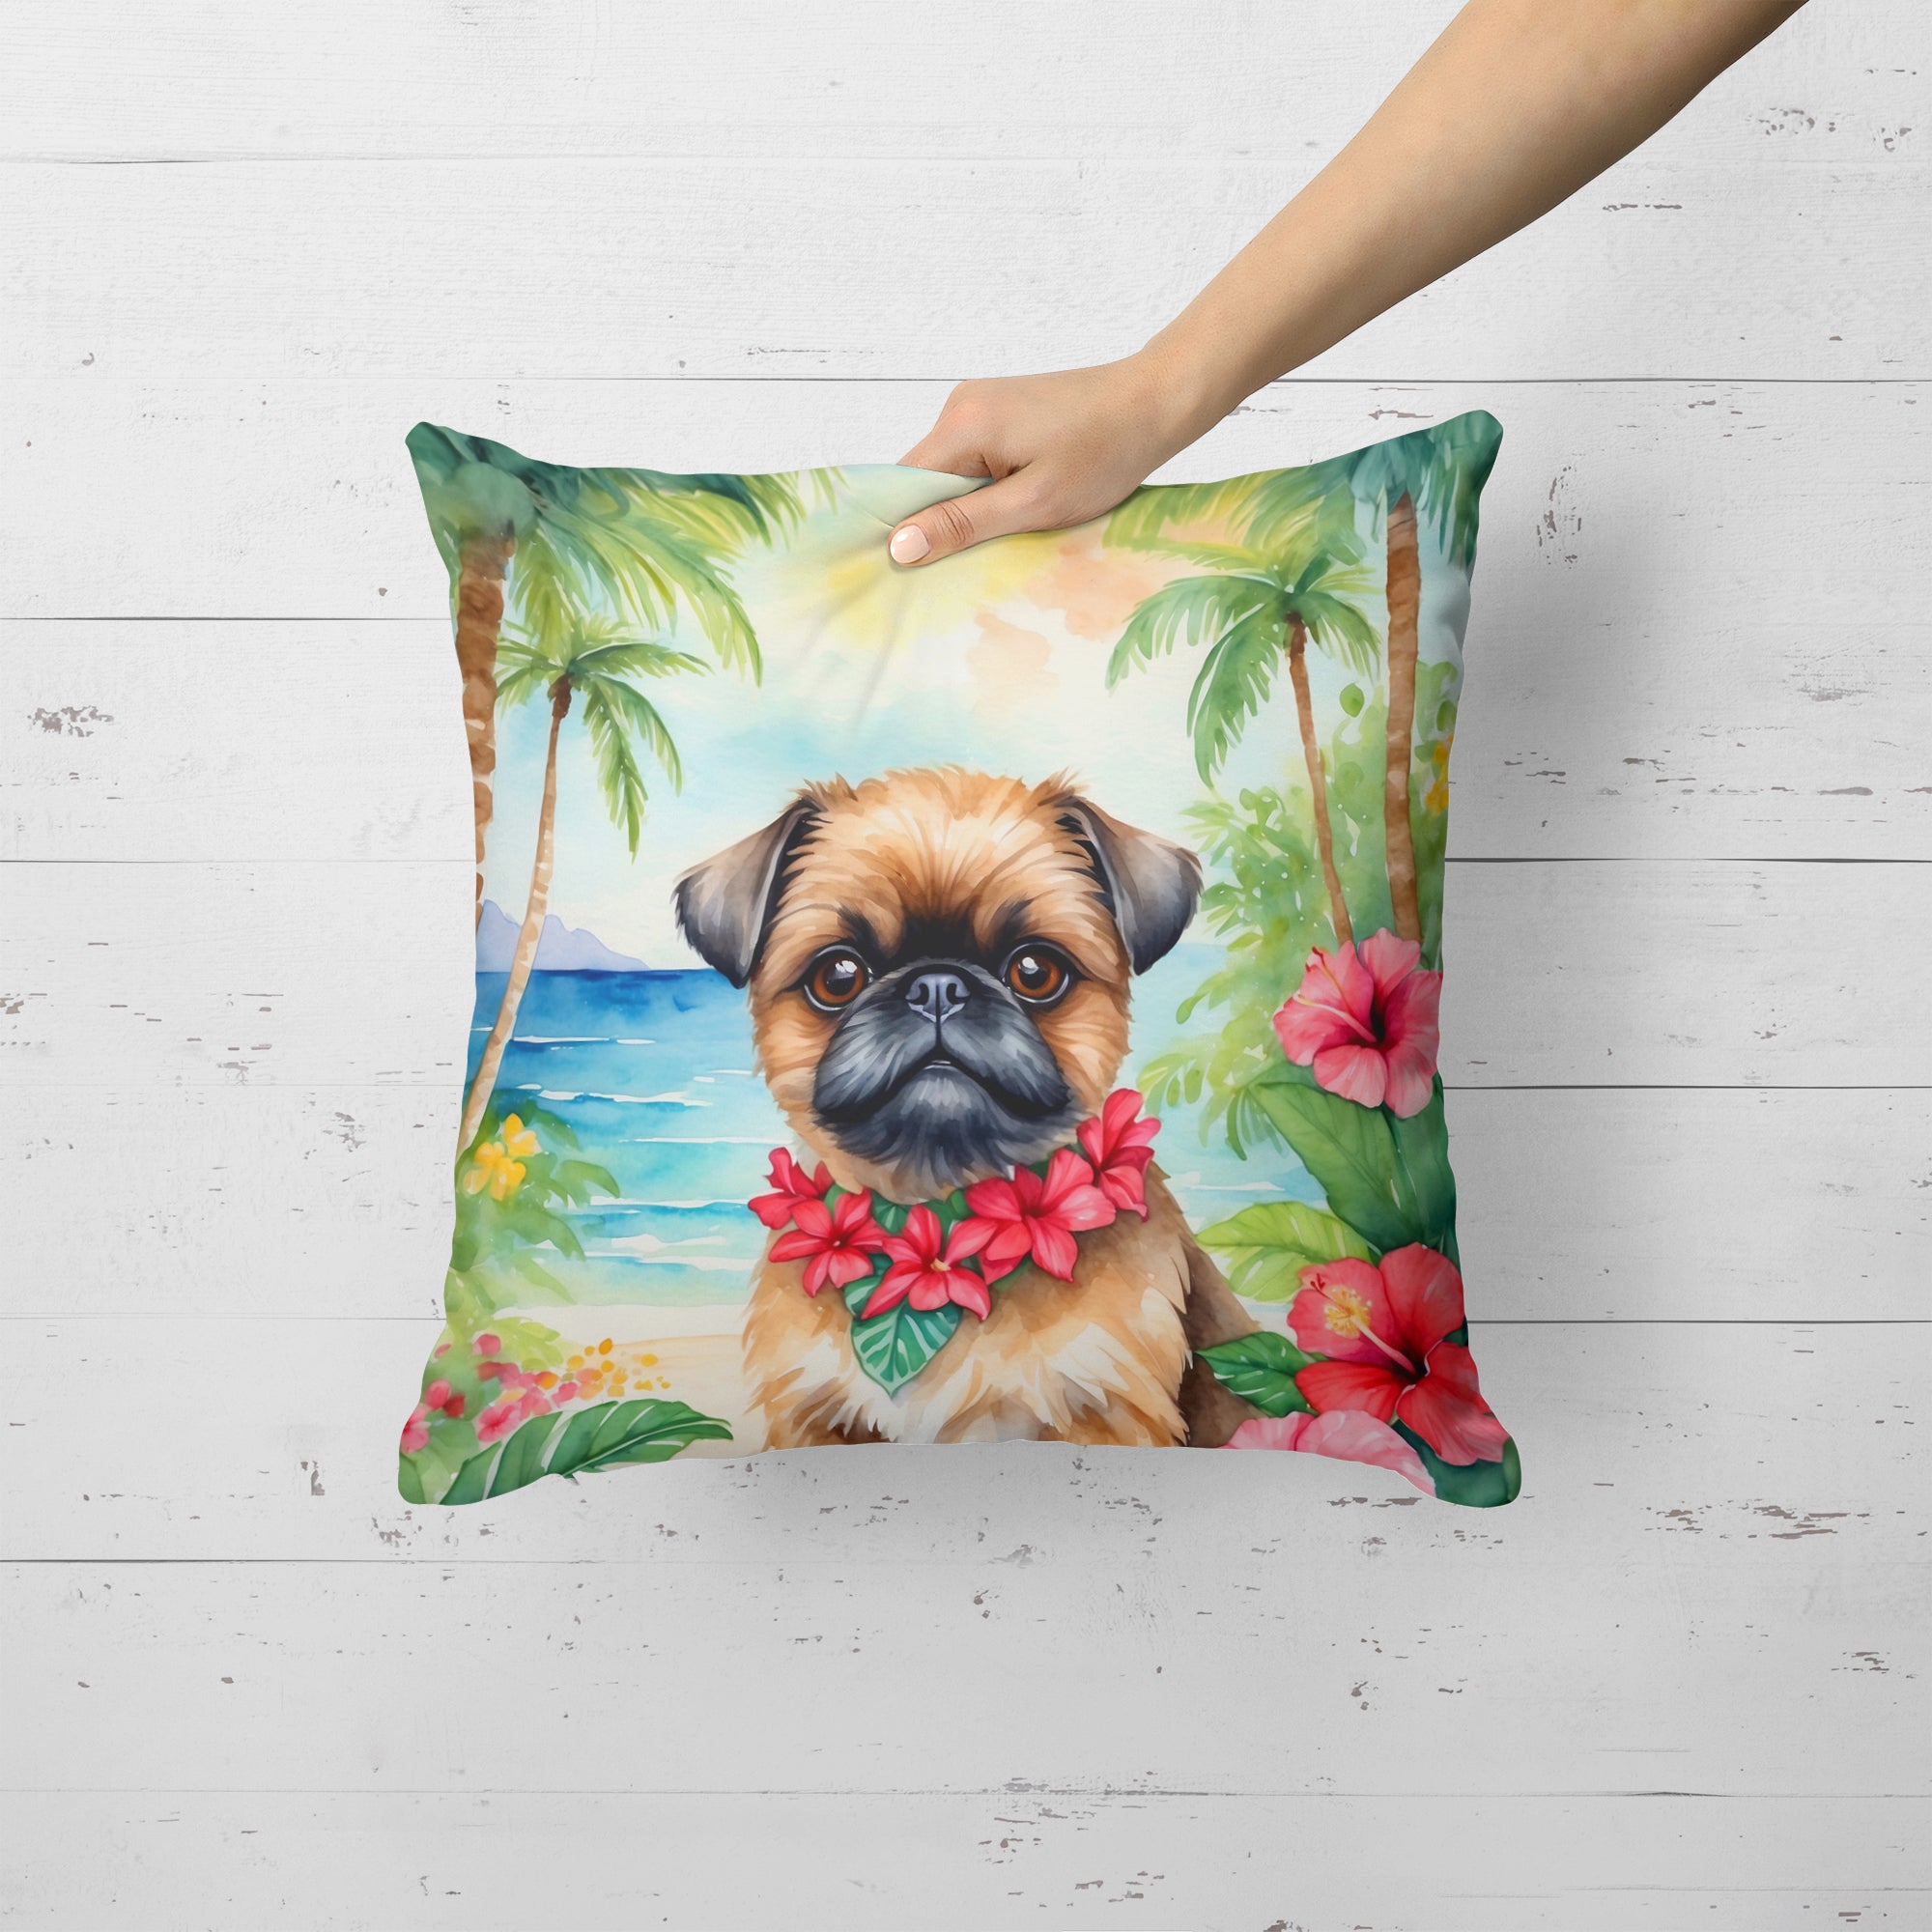 Buy this Brussels Griffon Luau Throw Pillow